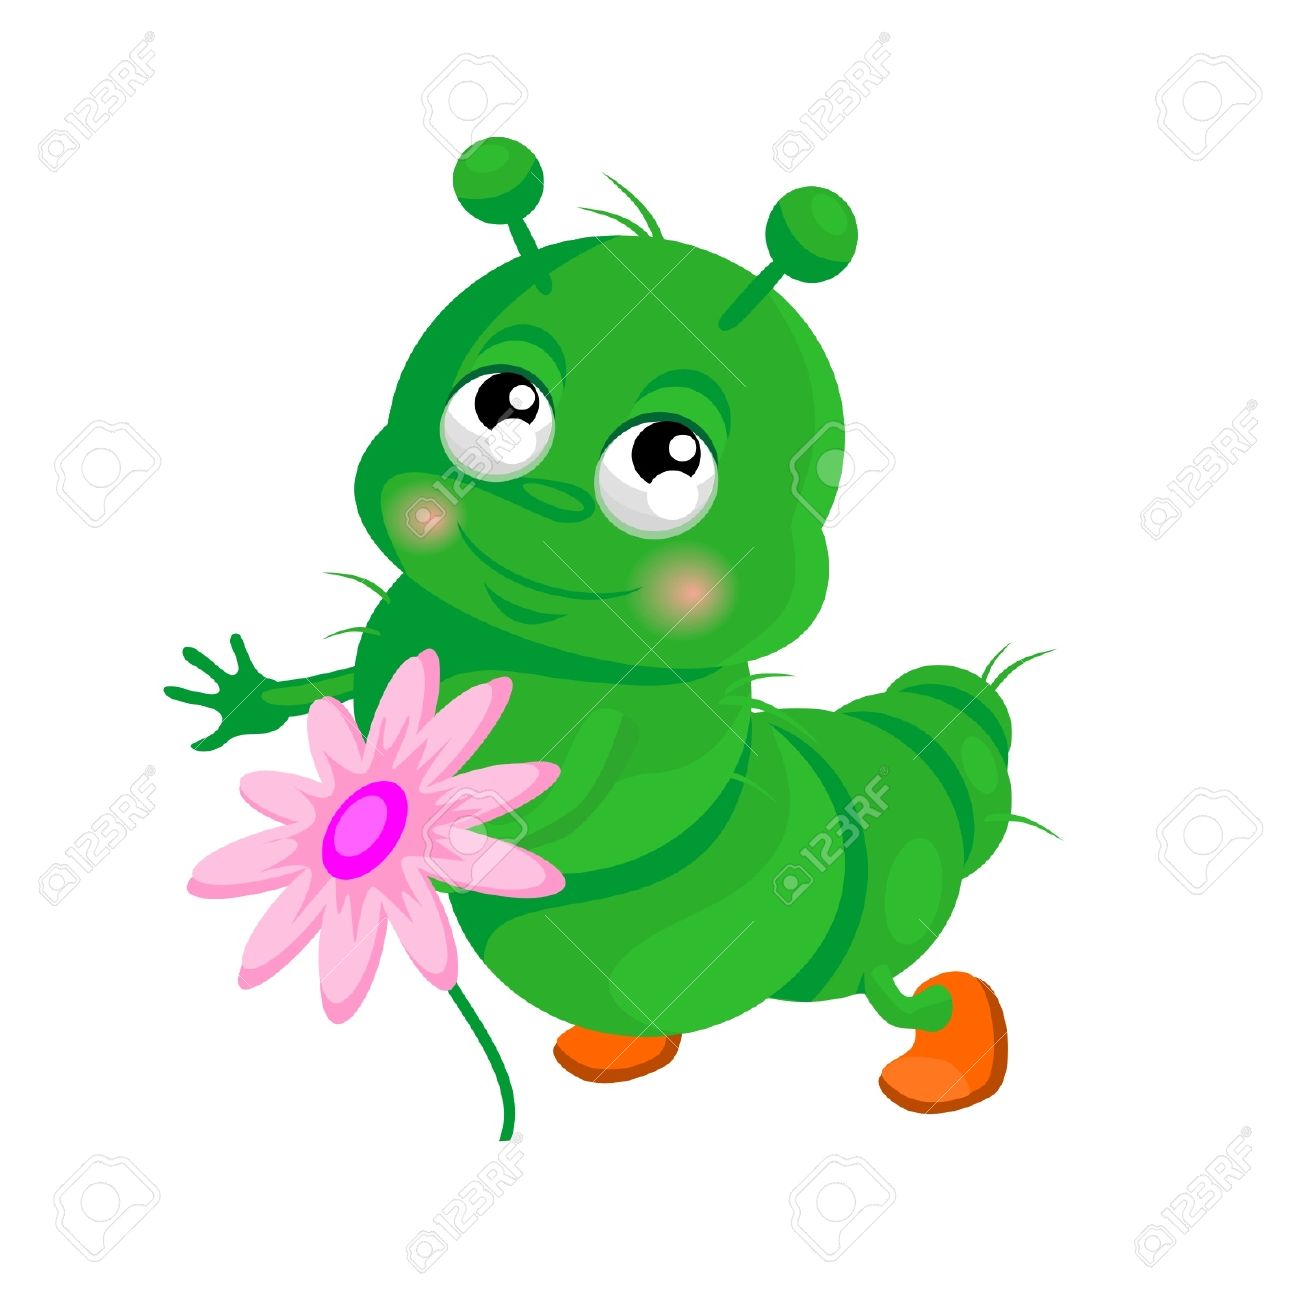 Happy Caterpillar With A Flower Royalty Free Cliparts, Vectors.